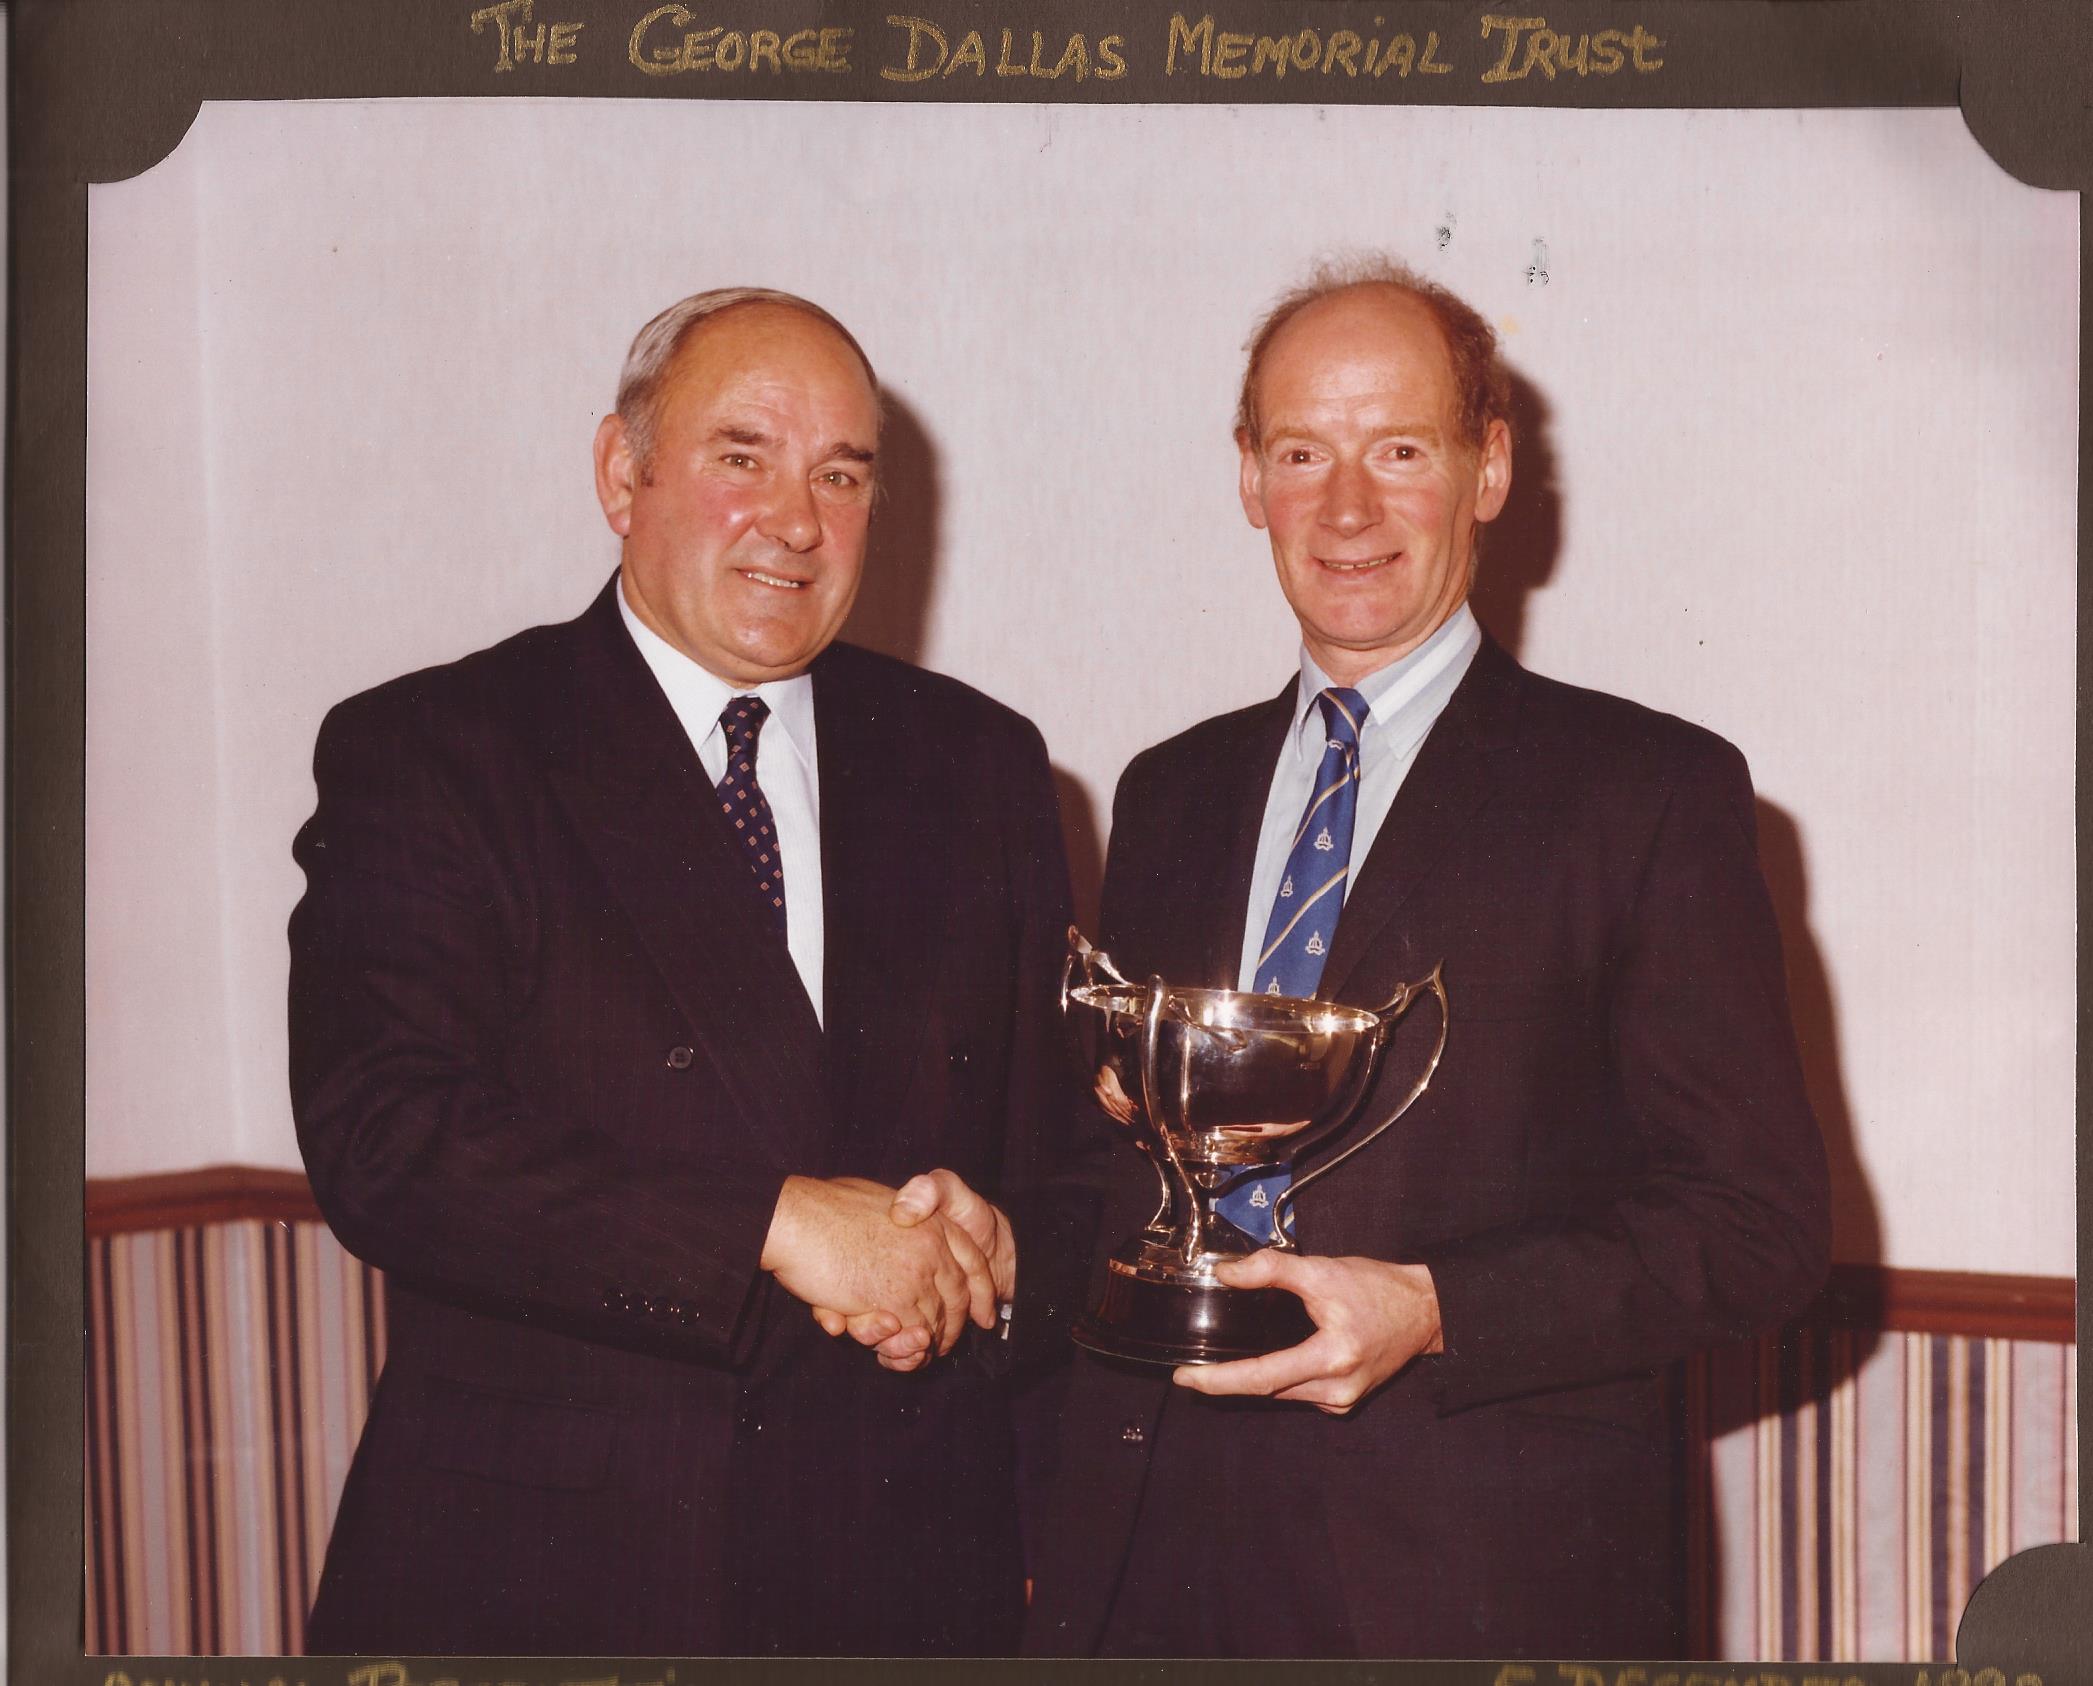 Danny presenting the Trust Trophy to Don Ritchie